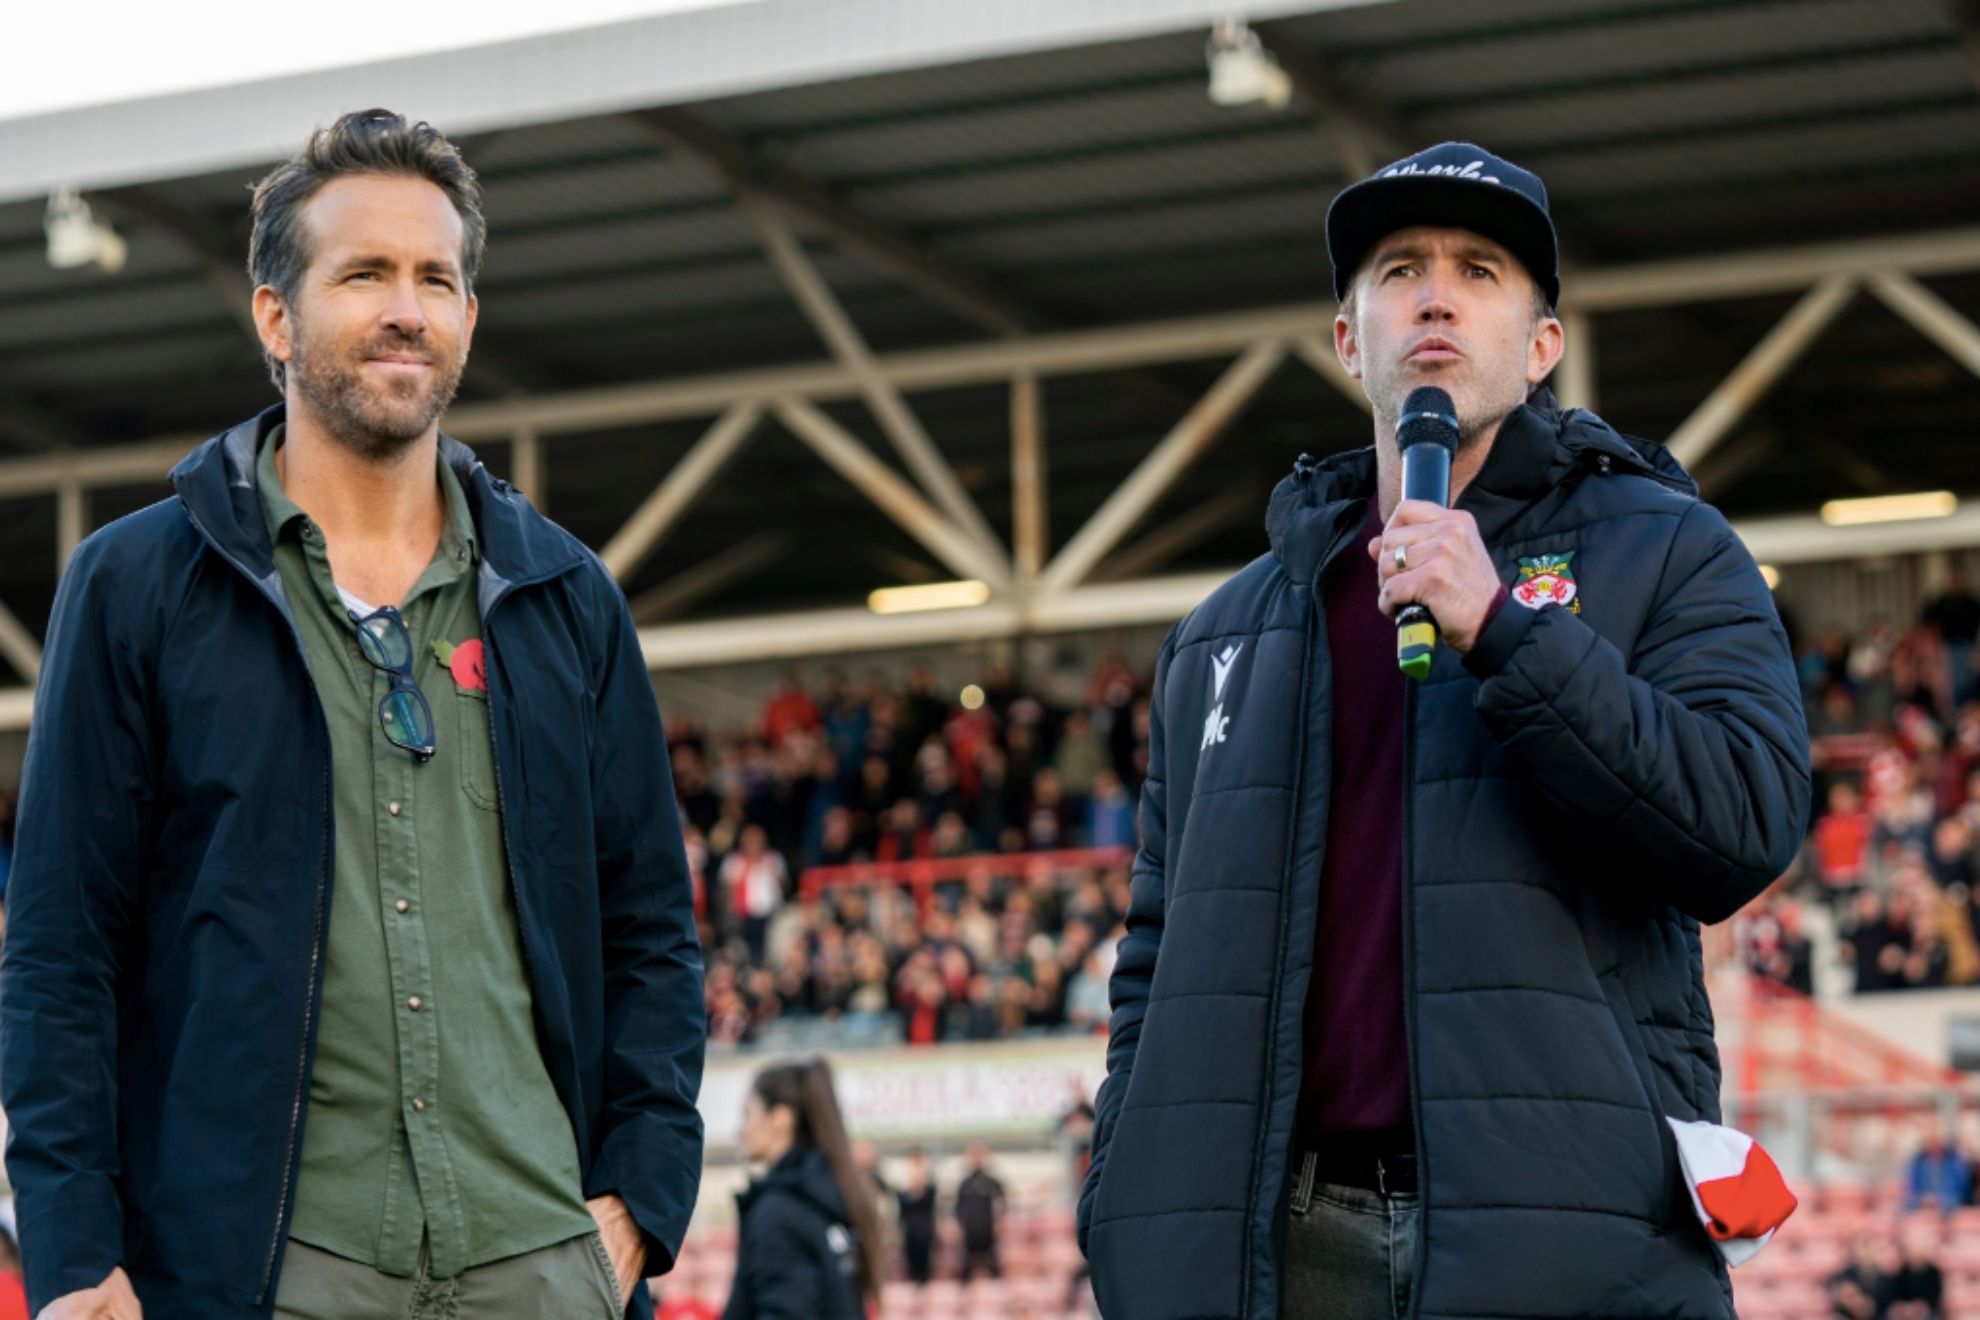 Wrexham beat Notts County in National League promotion showdown as Ryan Reynolds watches on